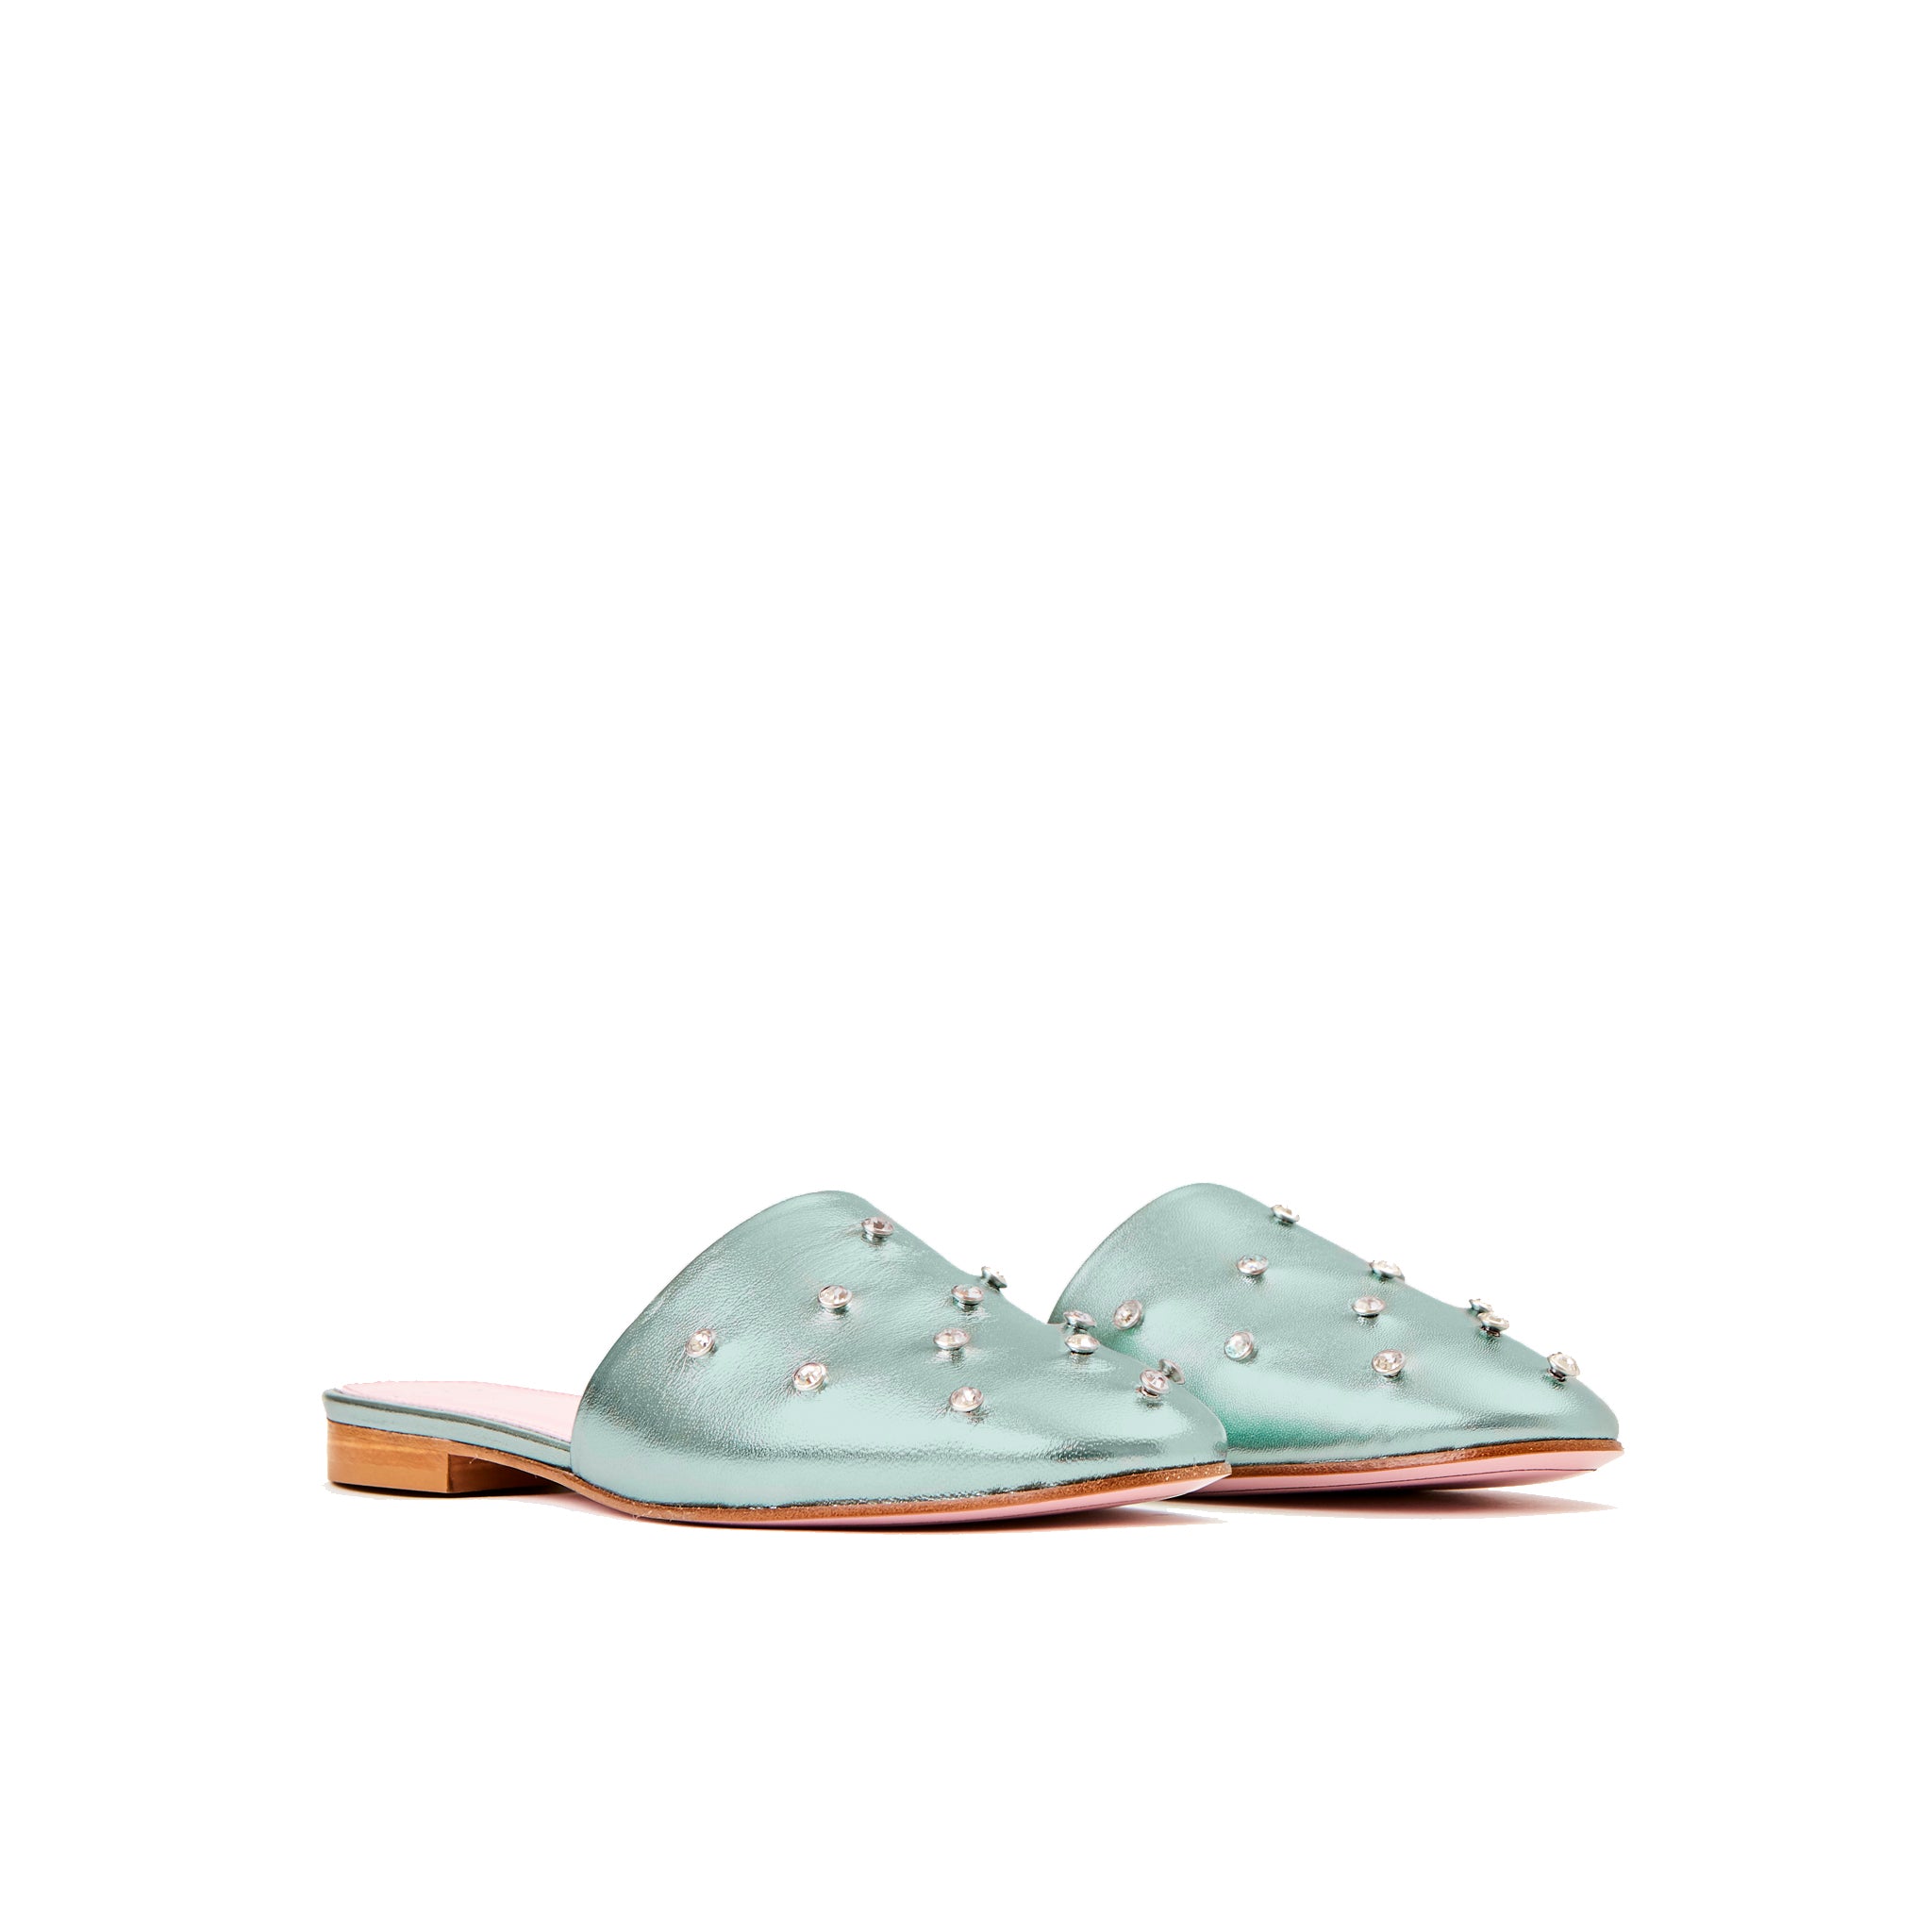 Phare crystal embellsihed slipper in acqua metallic leather 3/4 view 